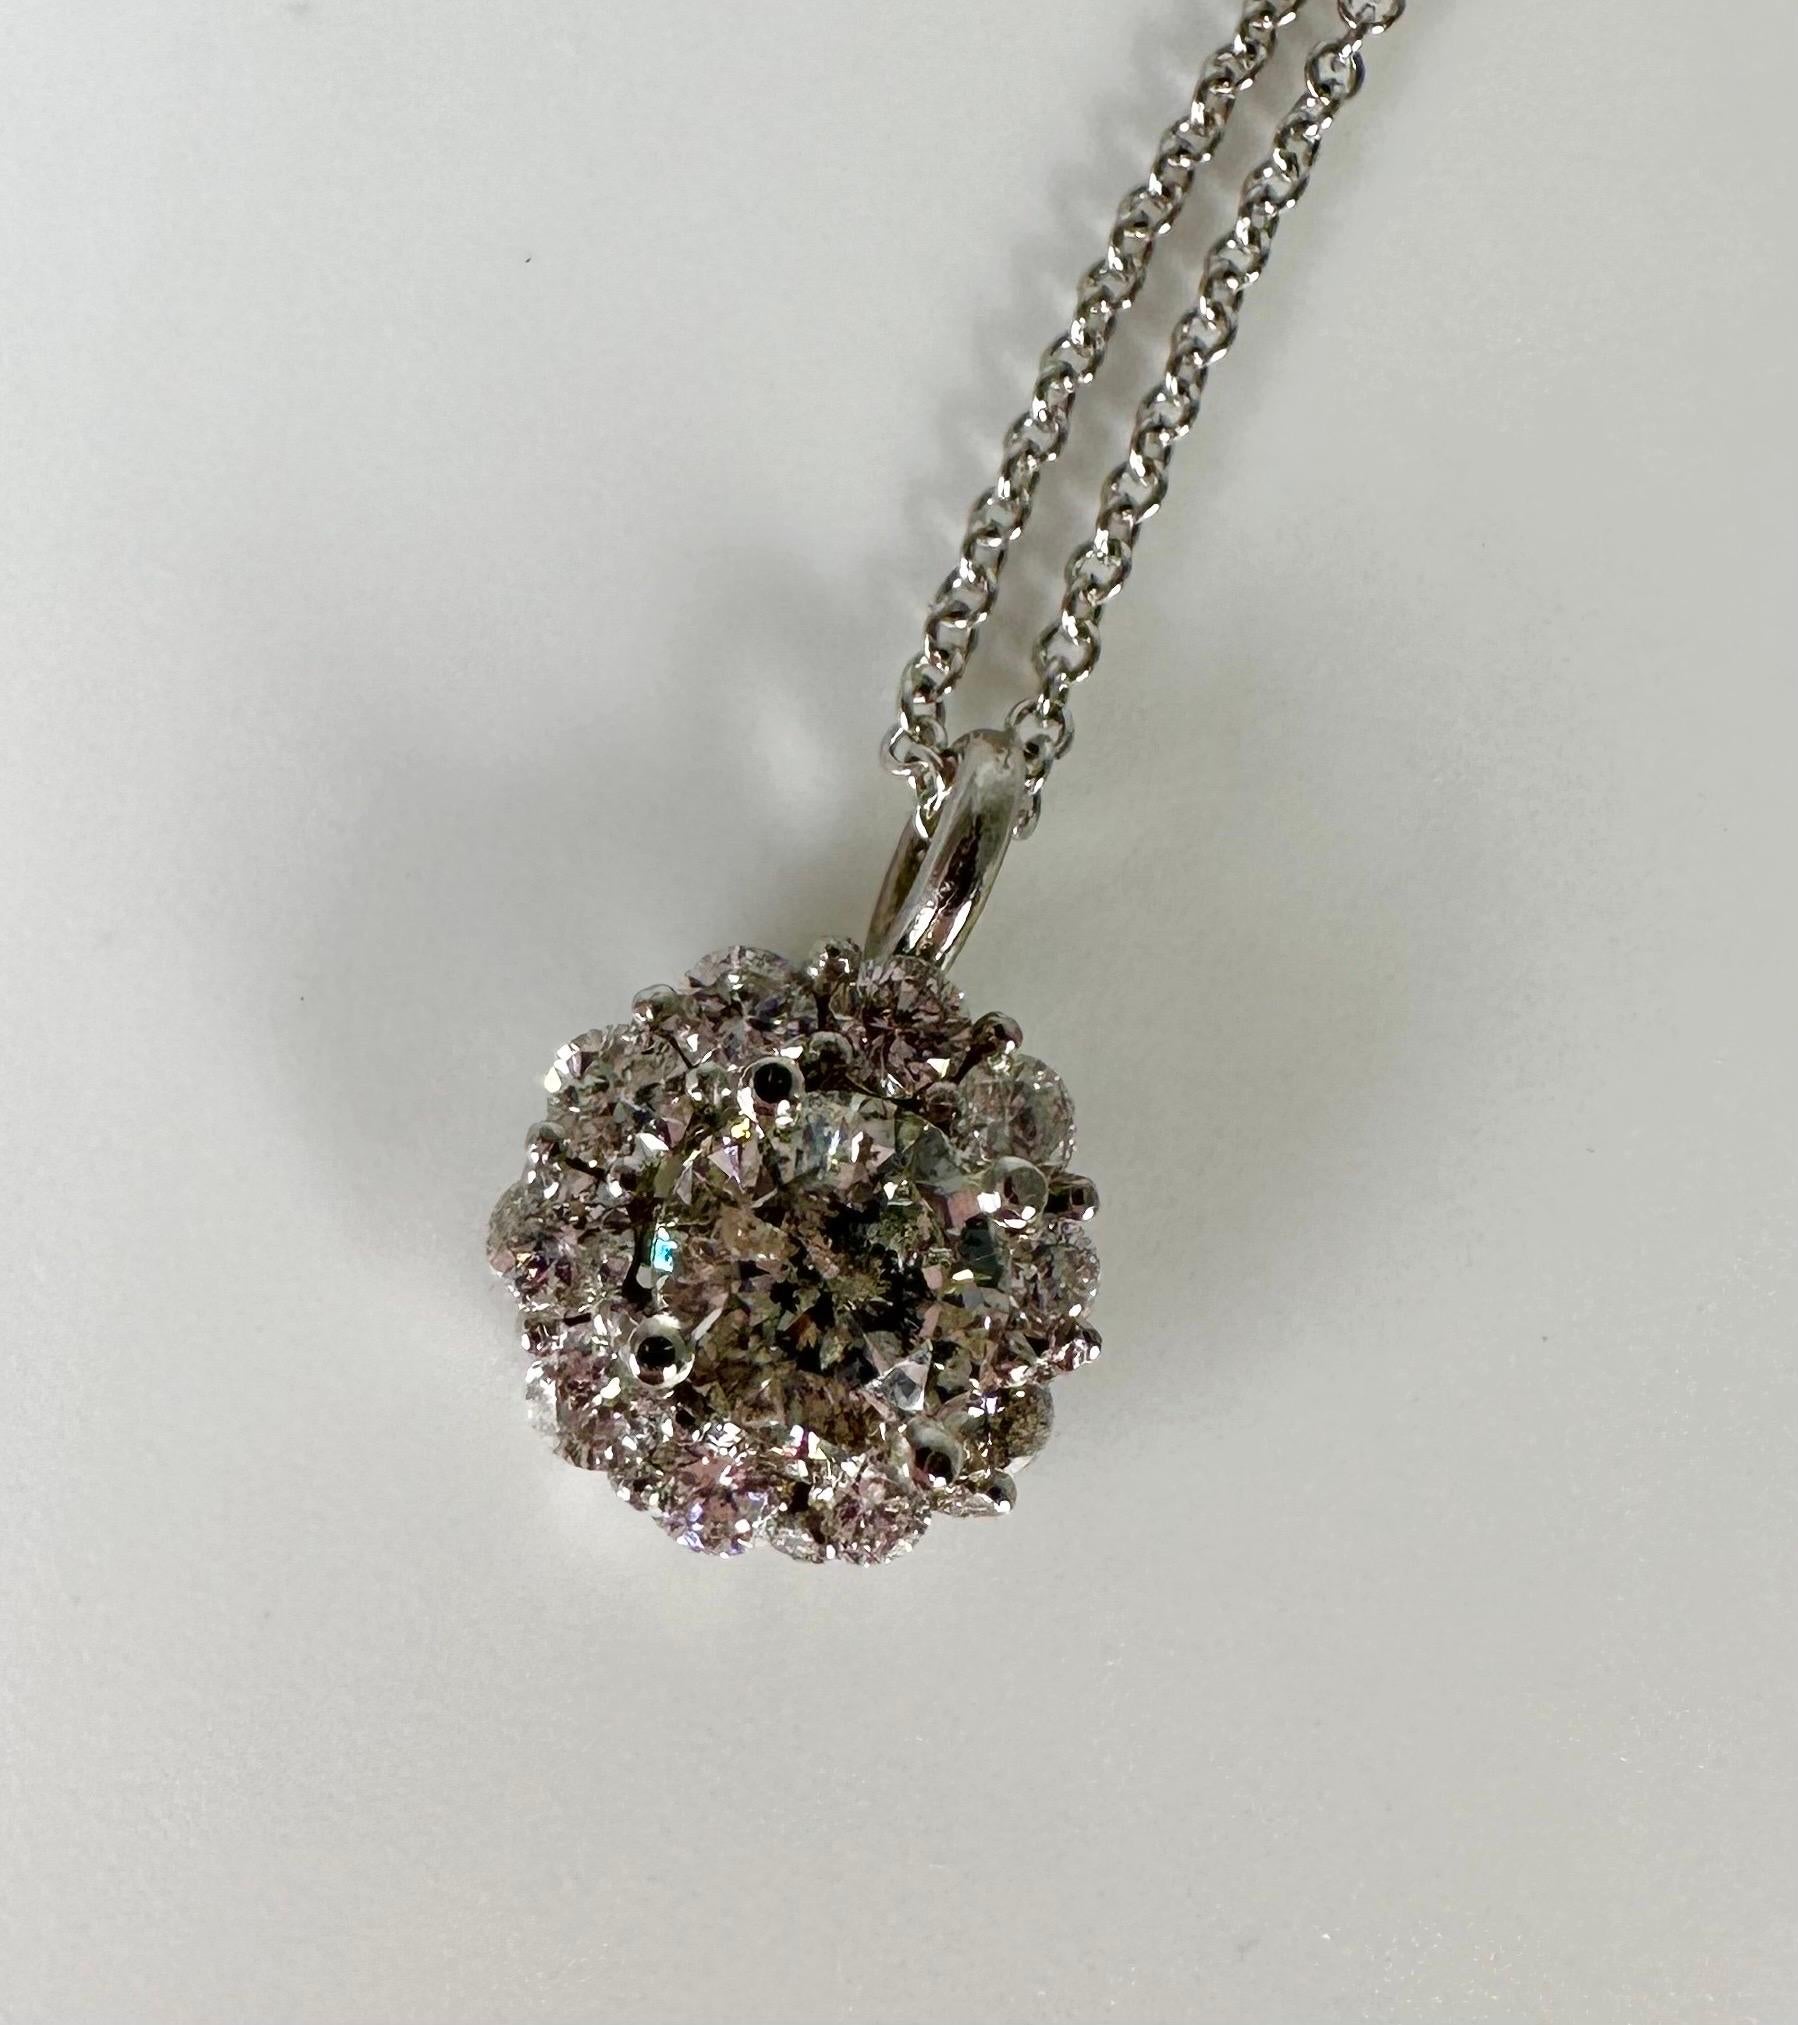 Stunning sparkling pendant necklace in 14KT whtie gold,made with natural diamonds of 1.43 carats in an open floral design. This necklace was handmade to perfection and hand finished for that extra sparkle!

METAL: 14KT gold
NATURAL